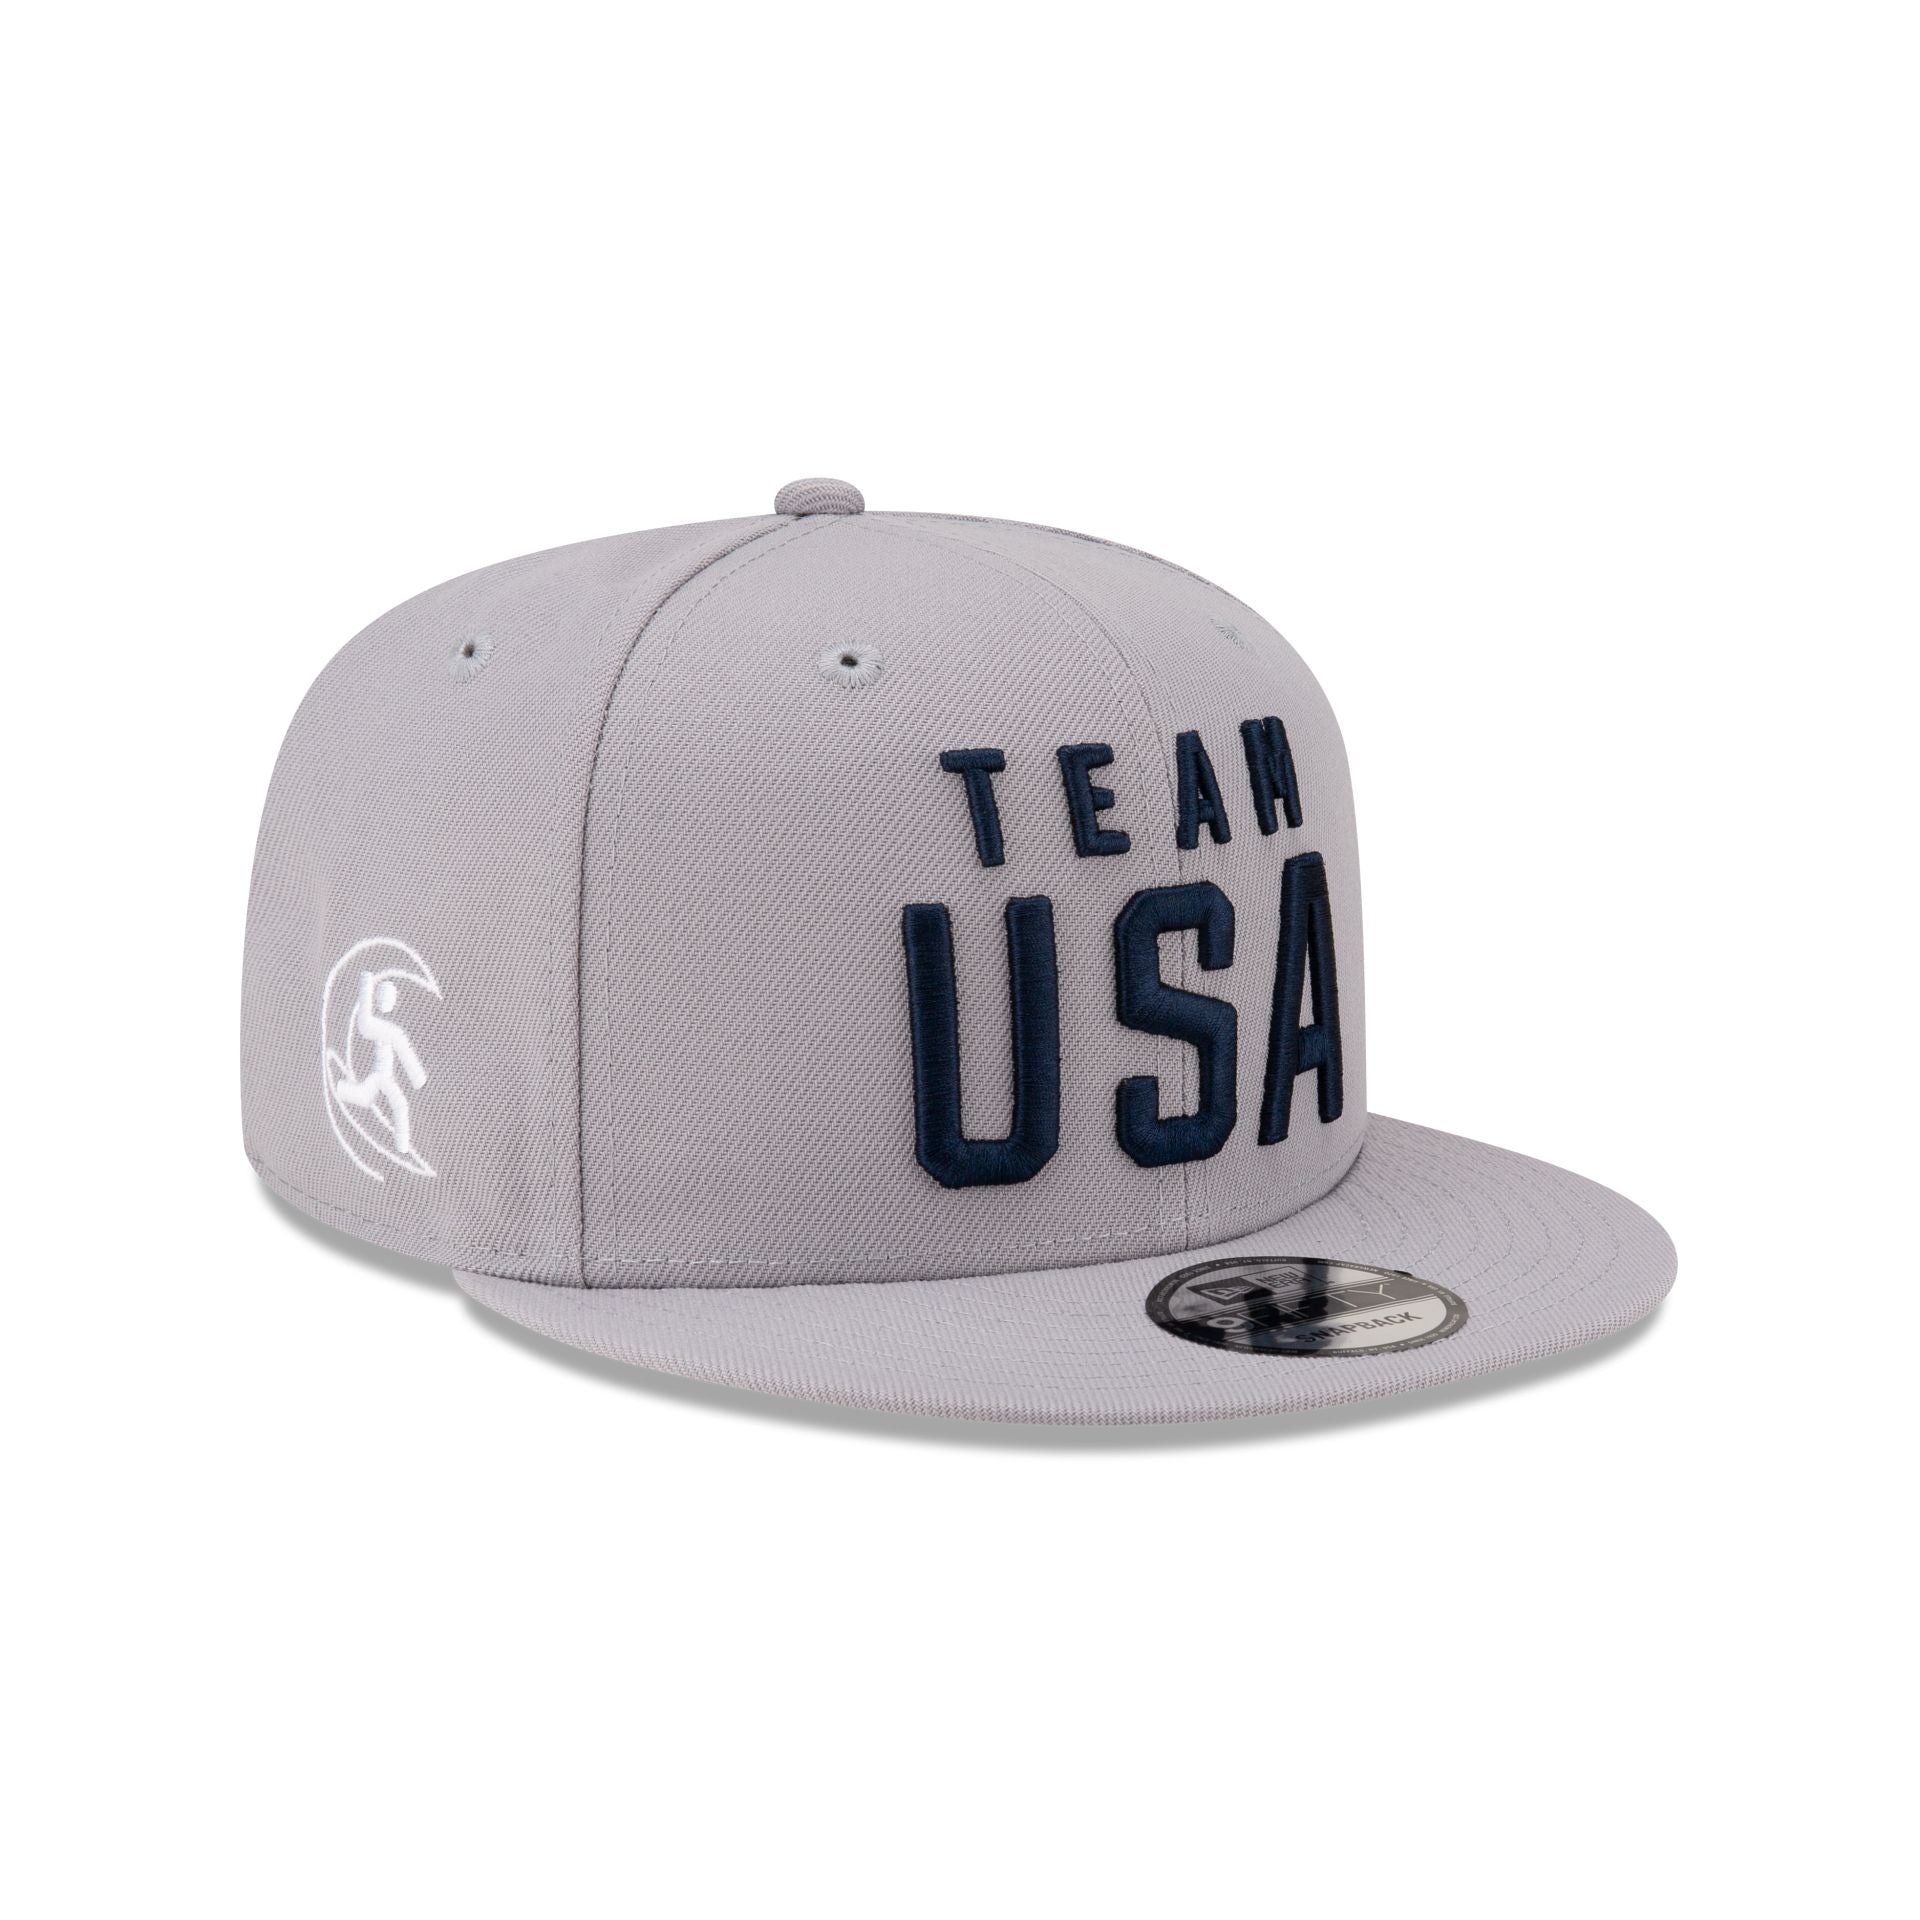 Team USA Surfing Gray 9FIFTY Snapback